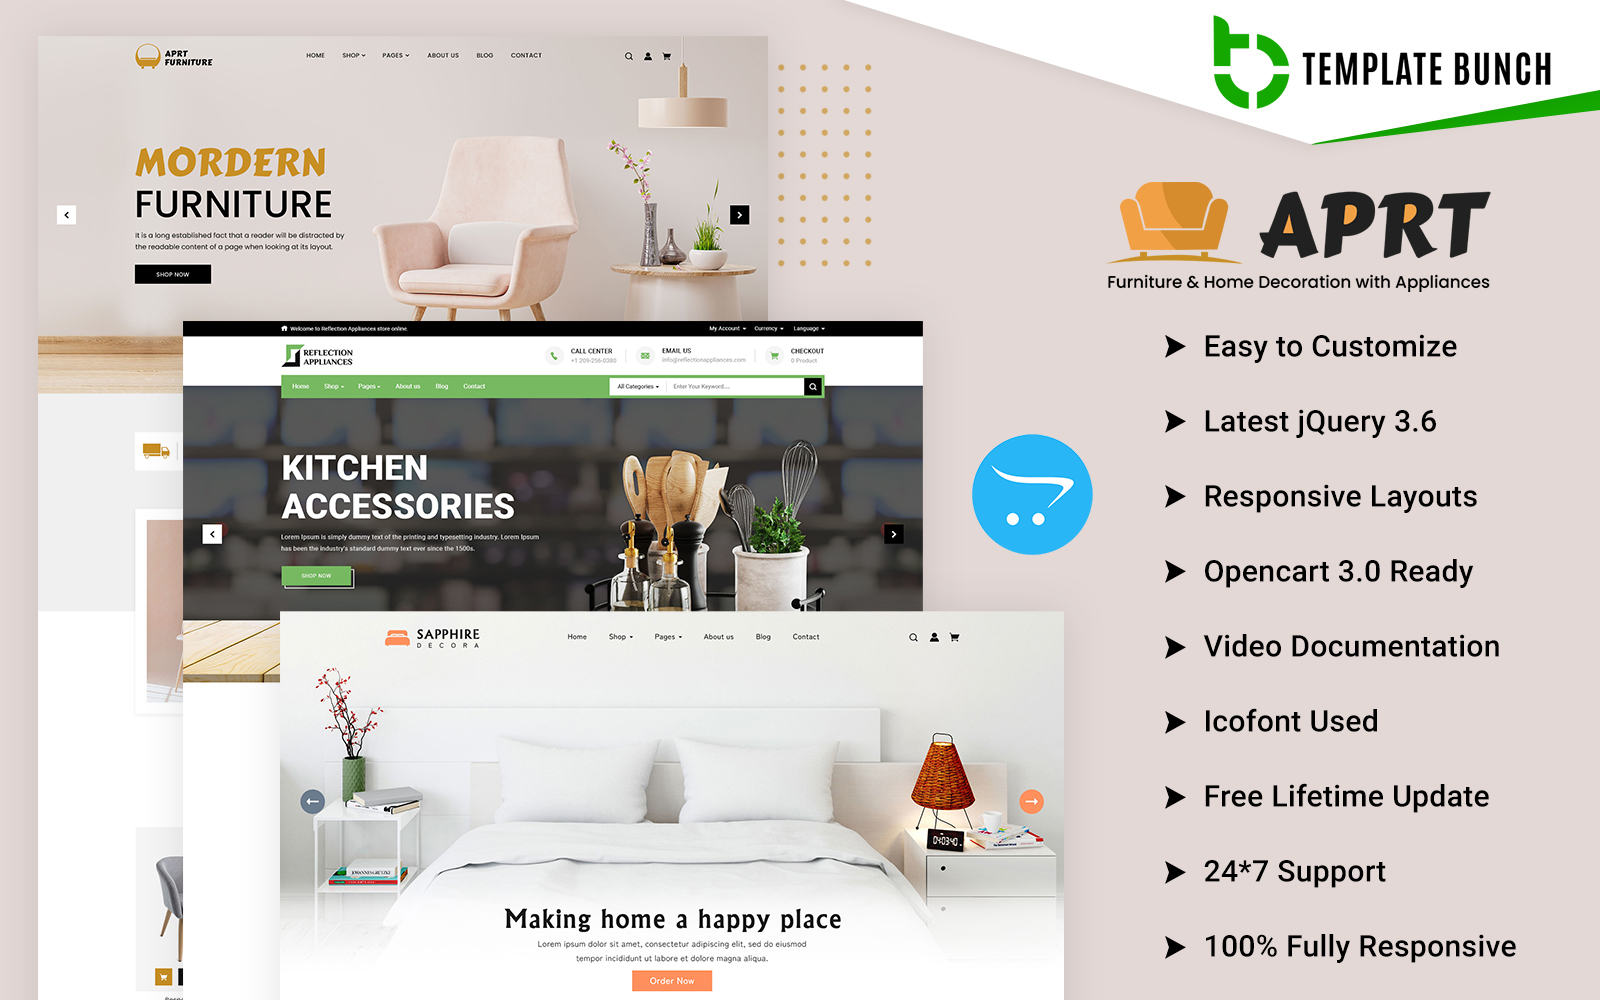 Aprt - Furniture and Decora with Home Appliance - Responsive Opencart 3.0.3.9 Ecommerce theme